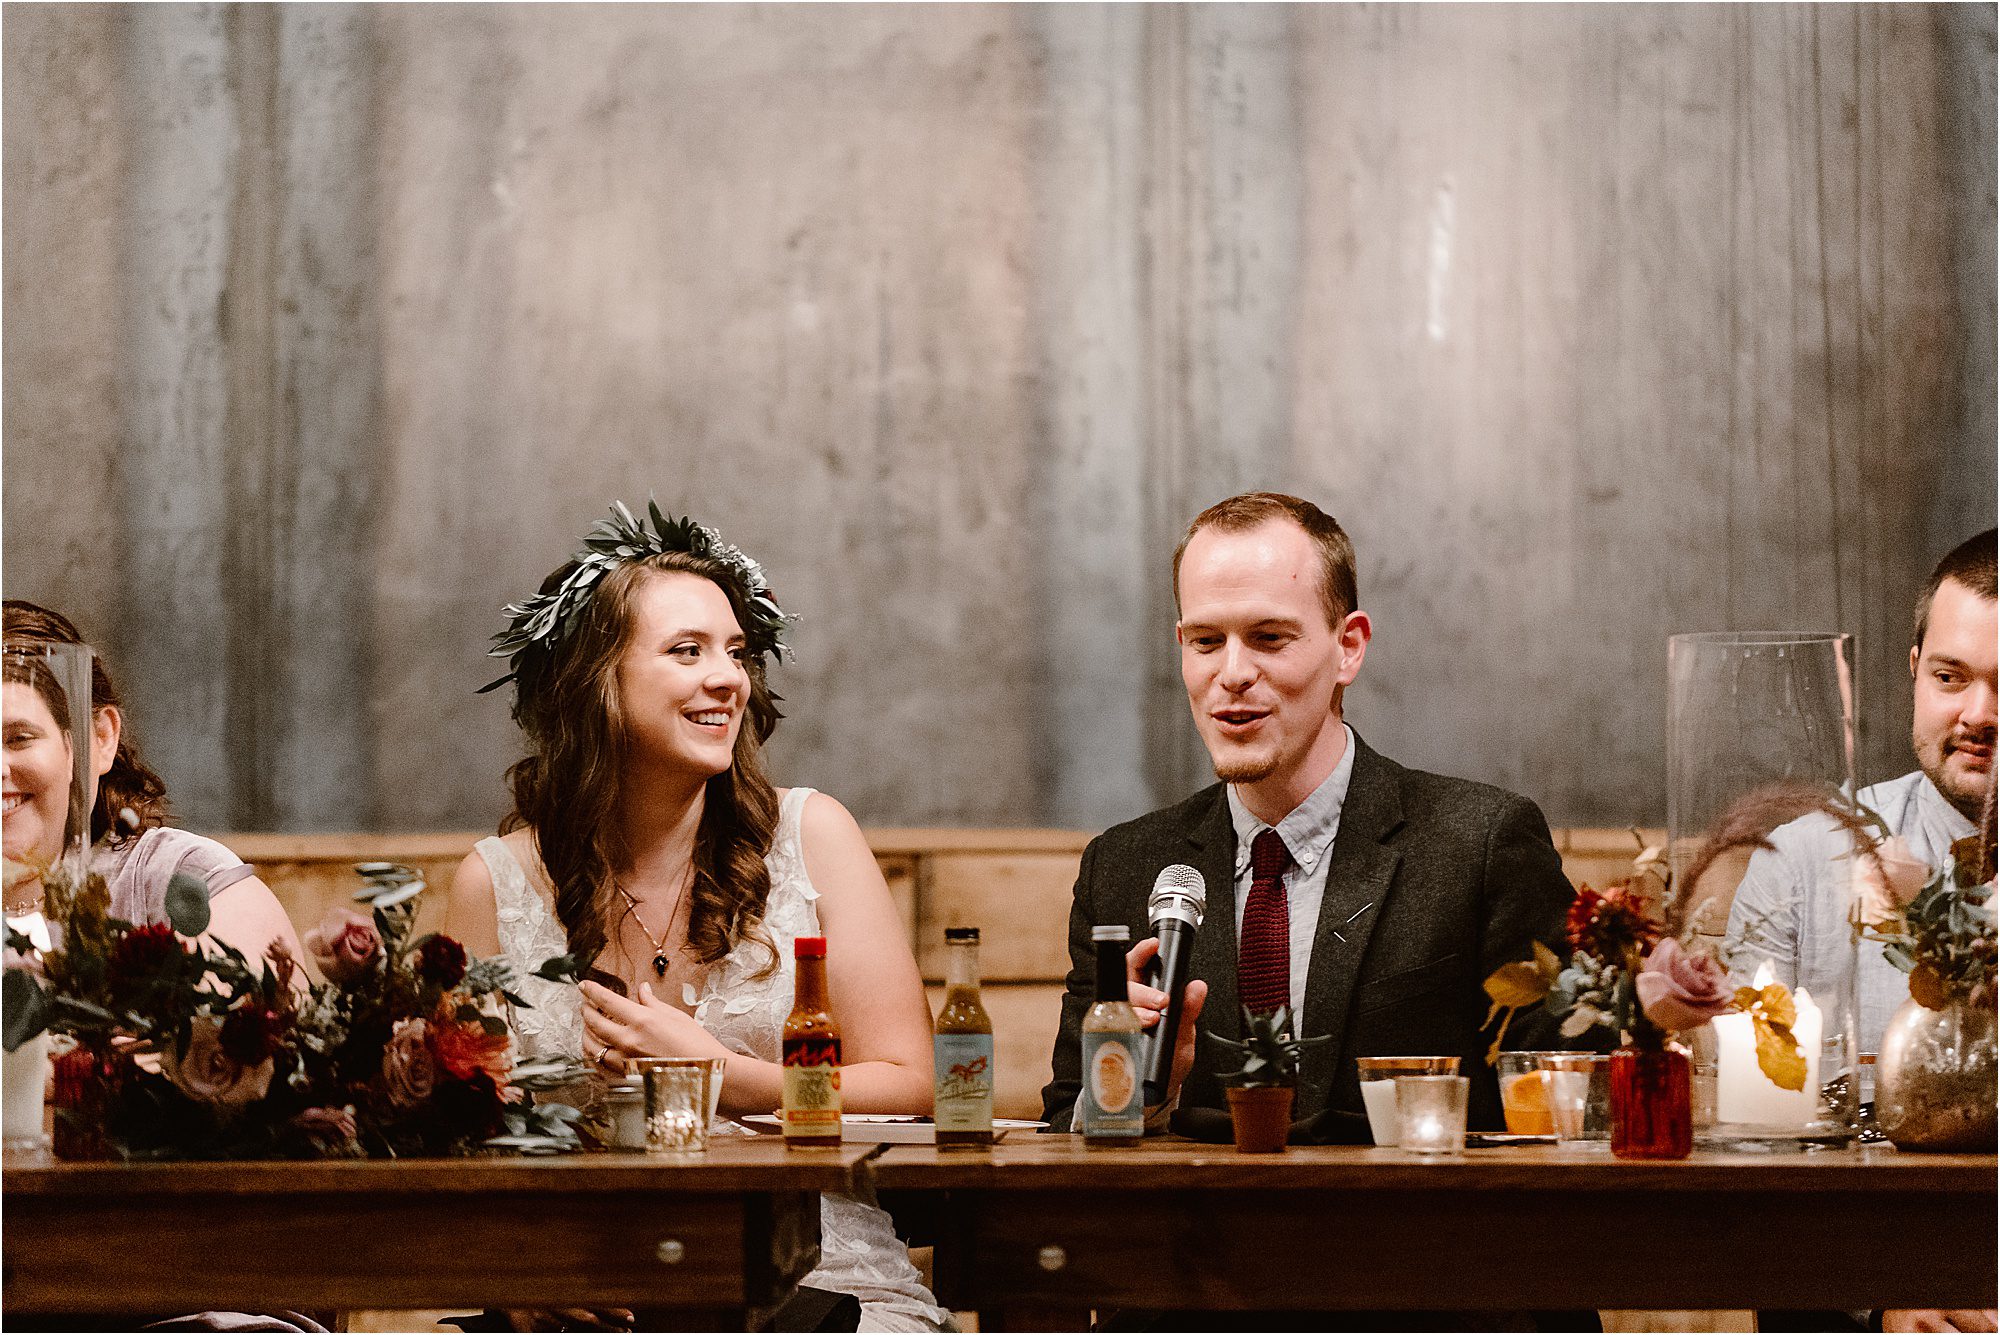 groom talks into microphone at wedding reception while seated at table